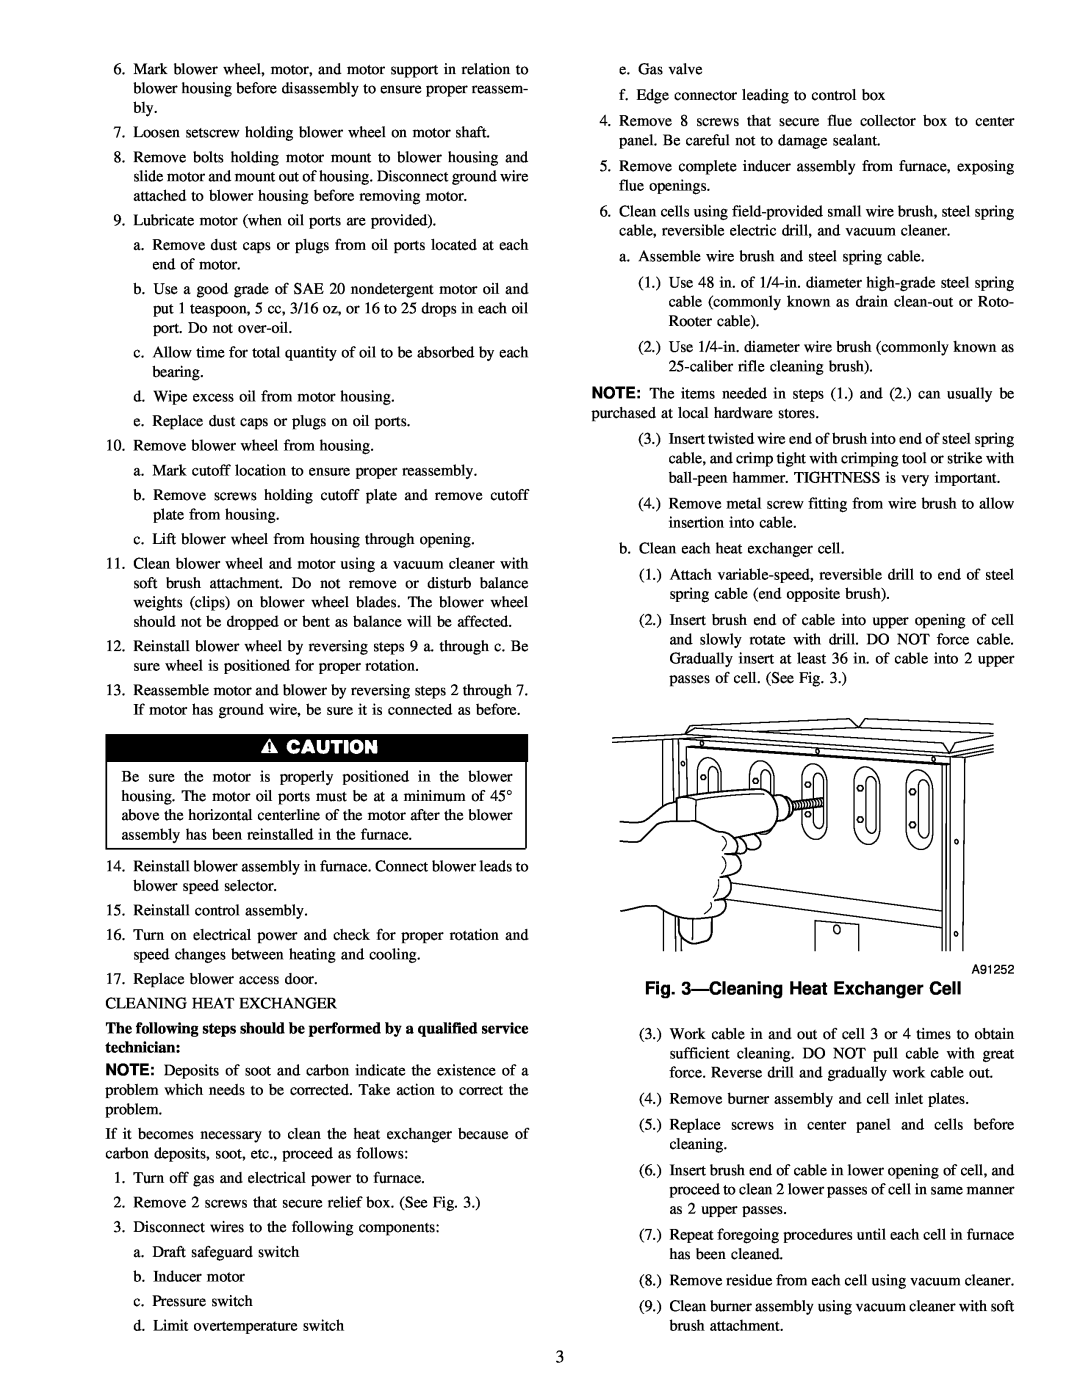 Carrier 58GFA instruction manual ÐCleaning Heat Exchanger Cell 